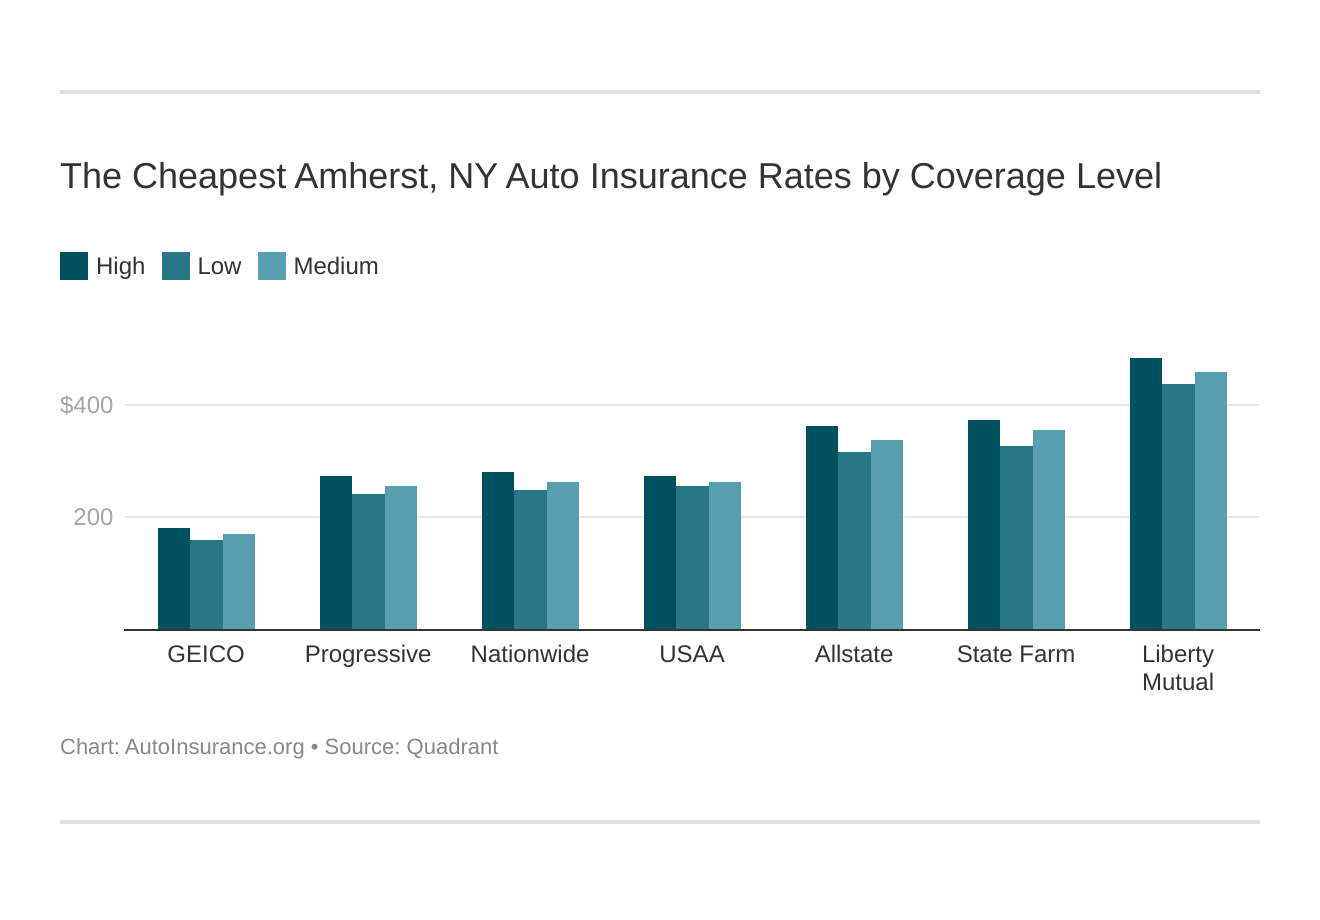 The Cheapest Amherst, NY Auto Insurance Rates by Coverage Level